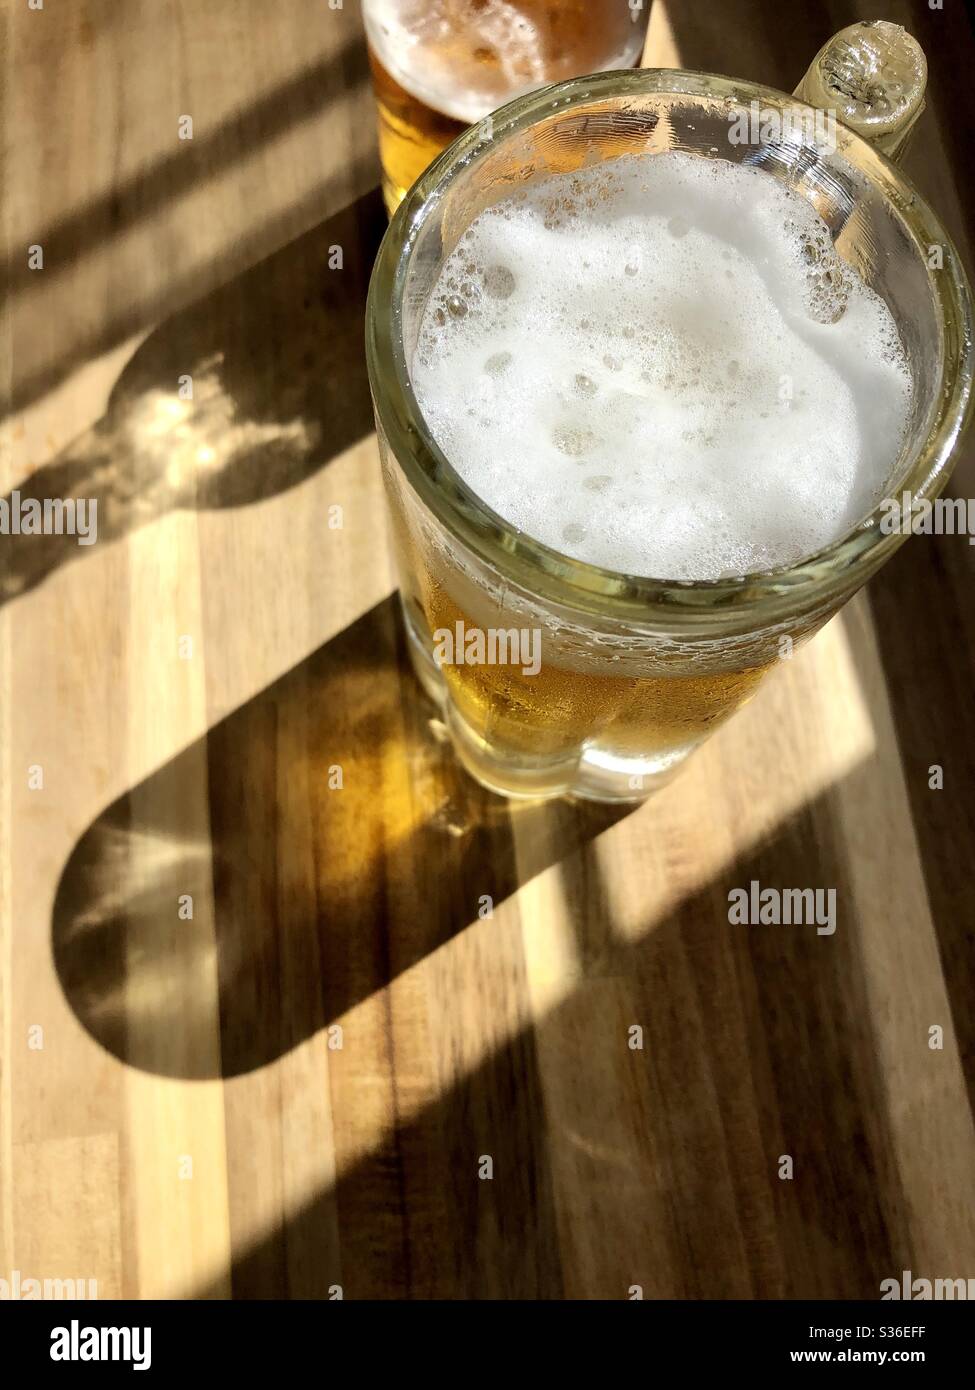 Glass mug of beer on a wood surface with sunlight shining through Stock Photo